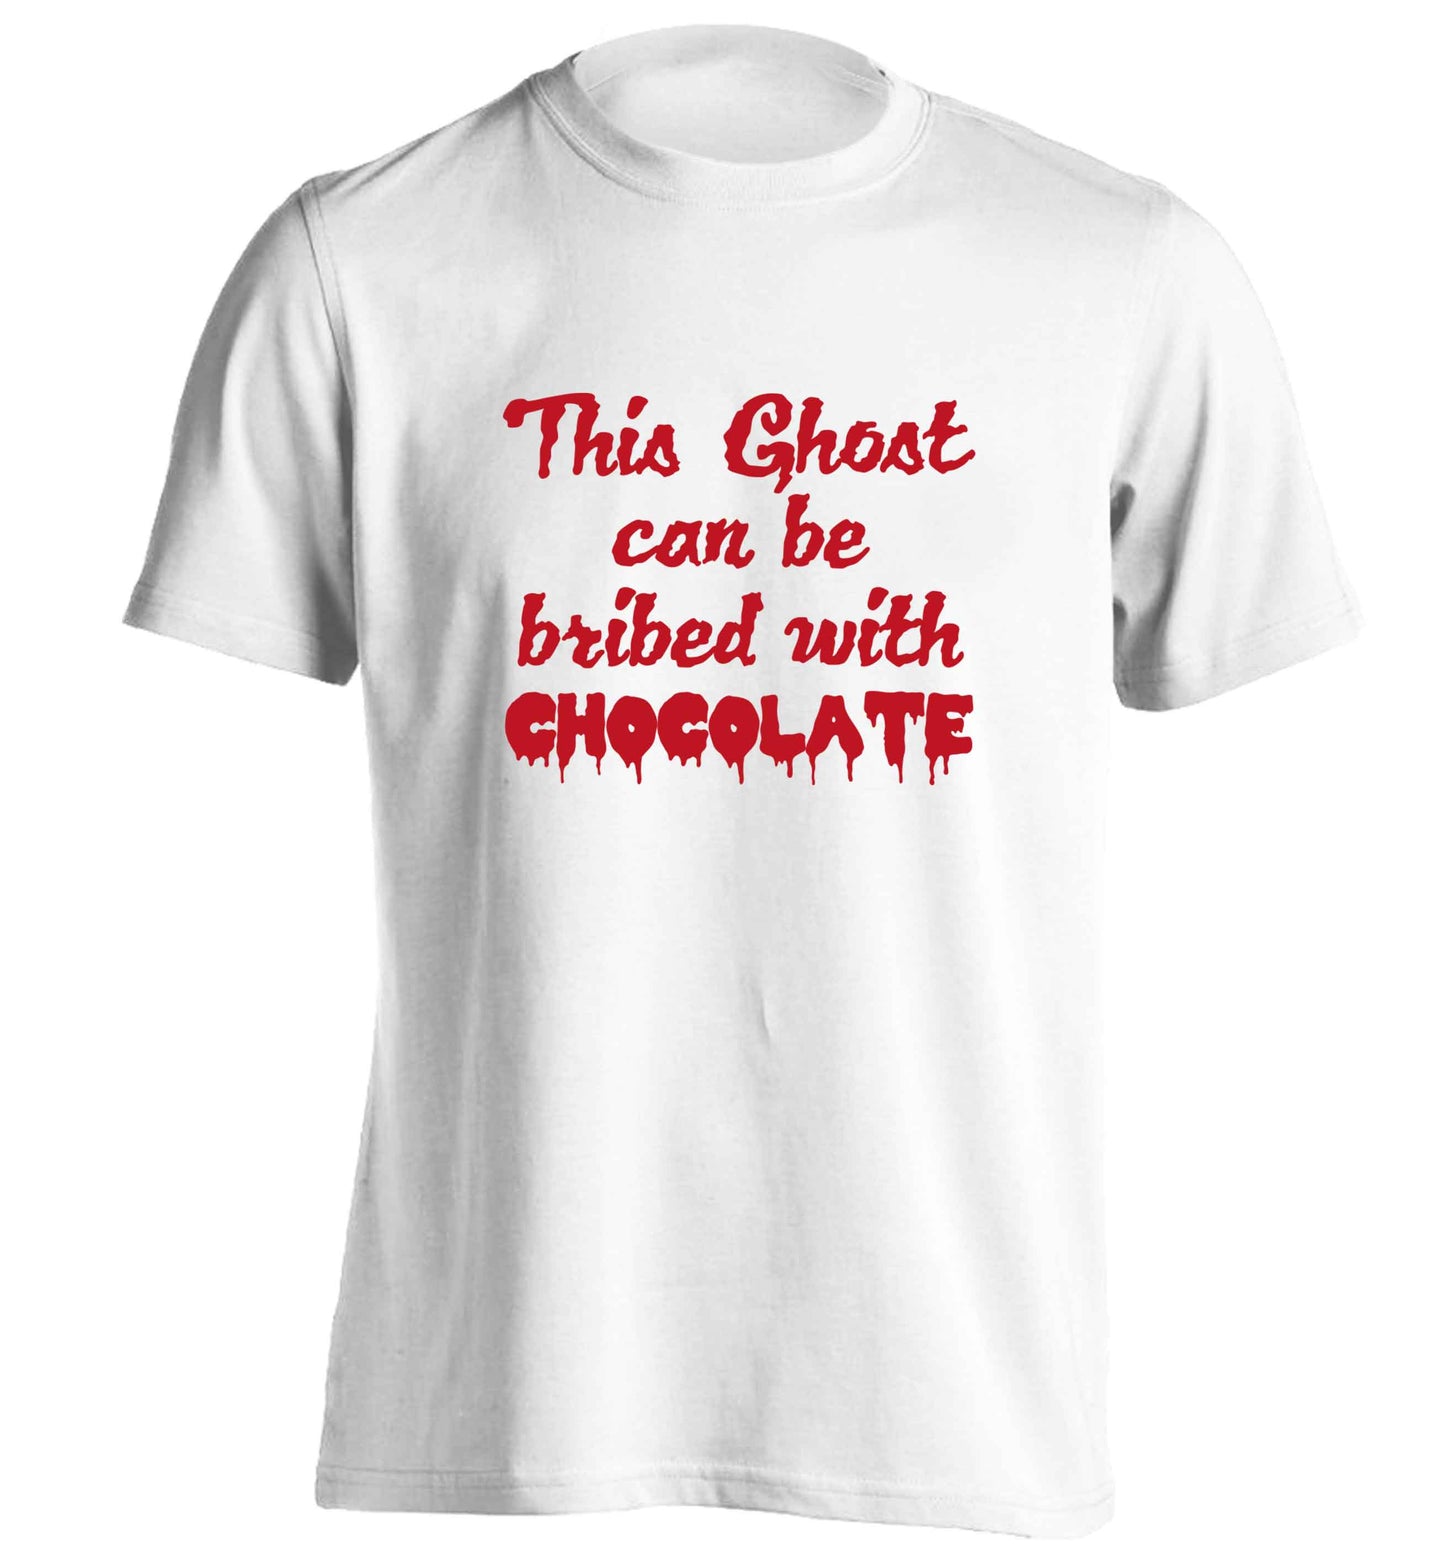 This ghost can be bribed with chocolate adults unisex white Tshirt 2XL